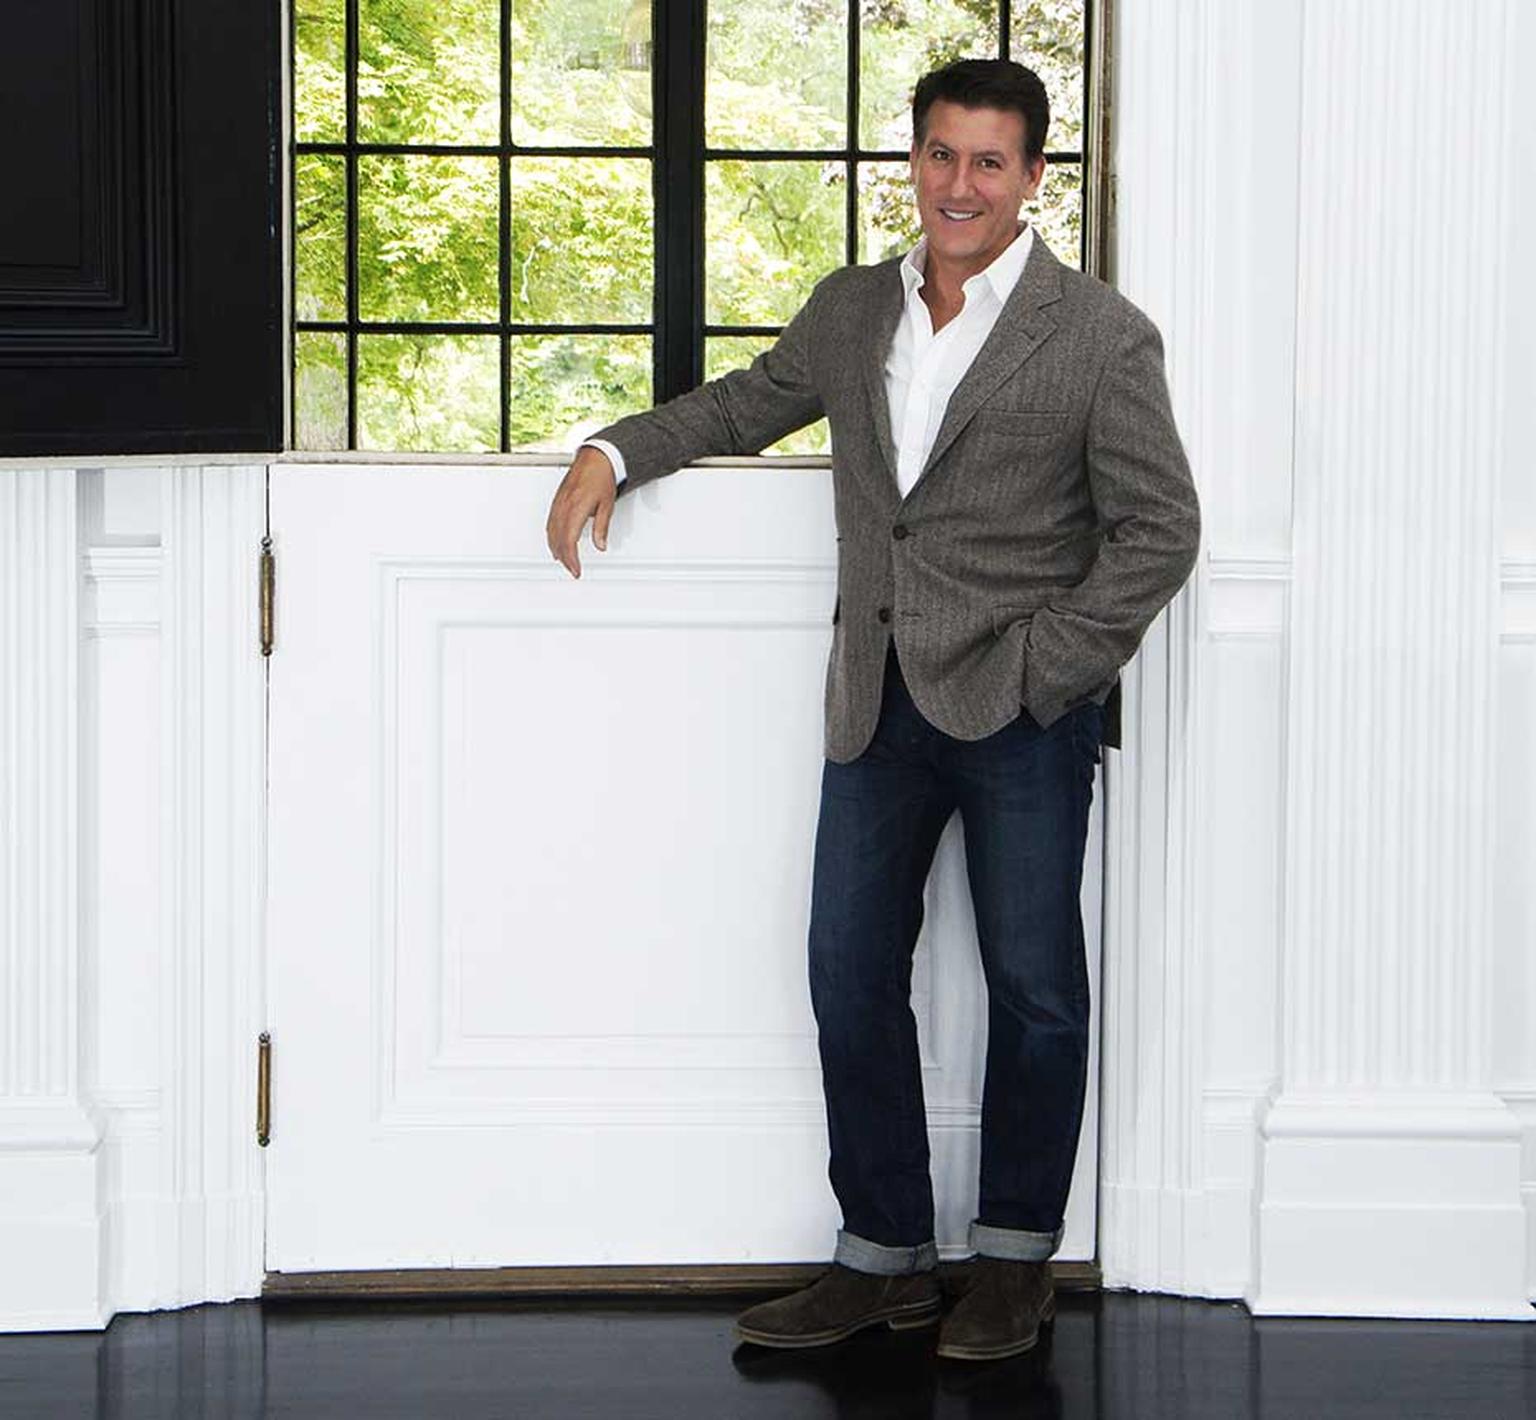 Michael Bruno launched 1stdibs 14 years ago as a website to help interior decorators source high-end antique furniture. Today, it has evolved into a thriving online marketplace covering fine art, fashion, jewellery and watches. Image by: ScullyFoto.com